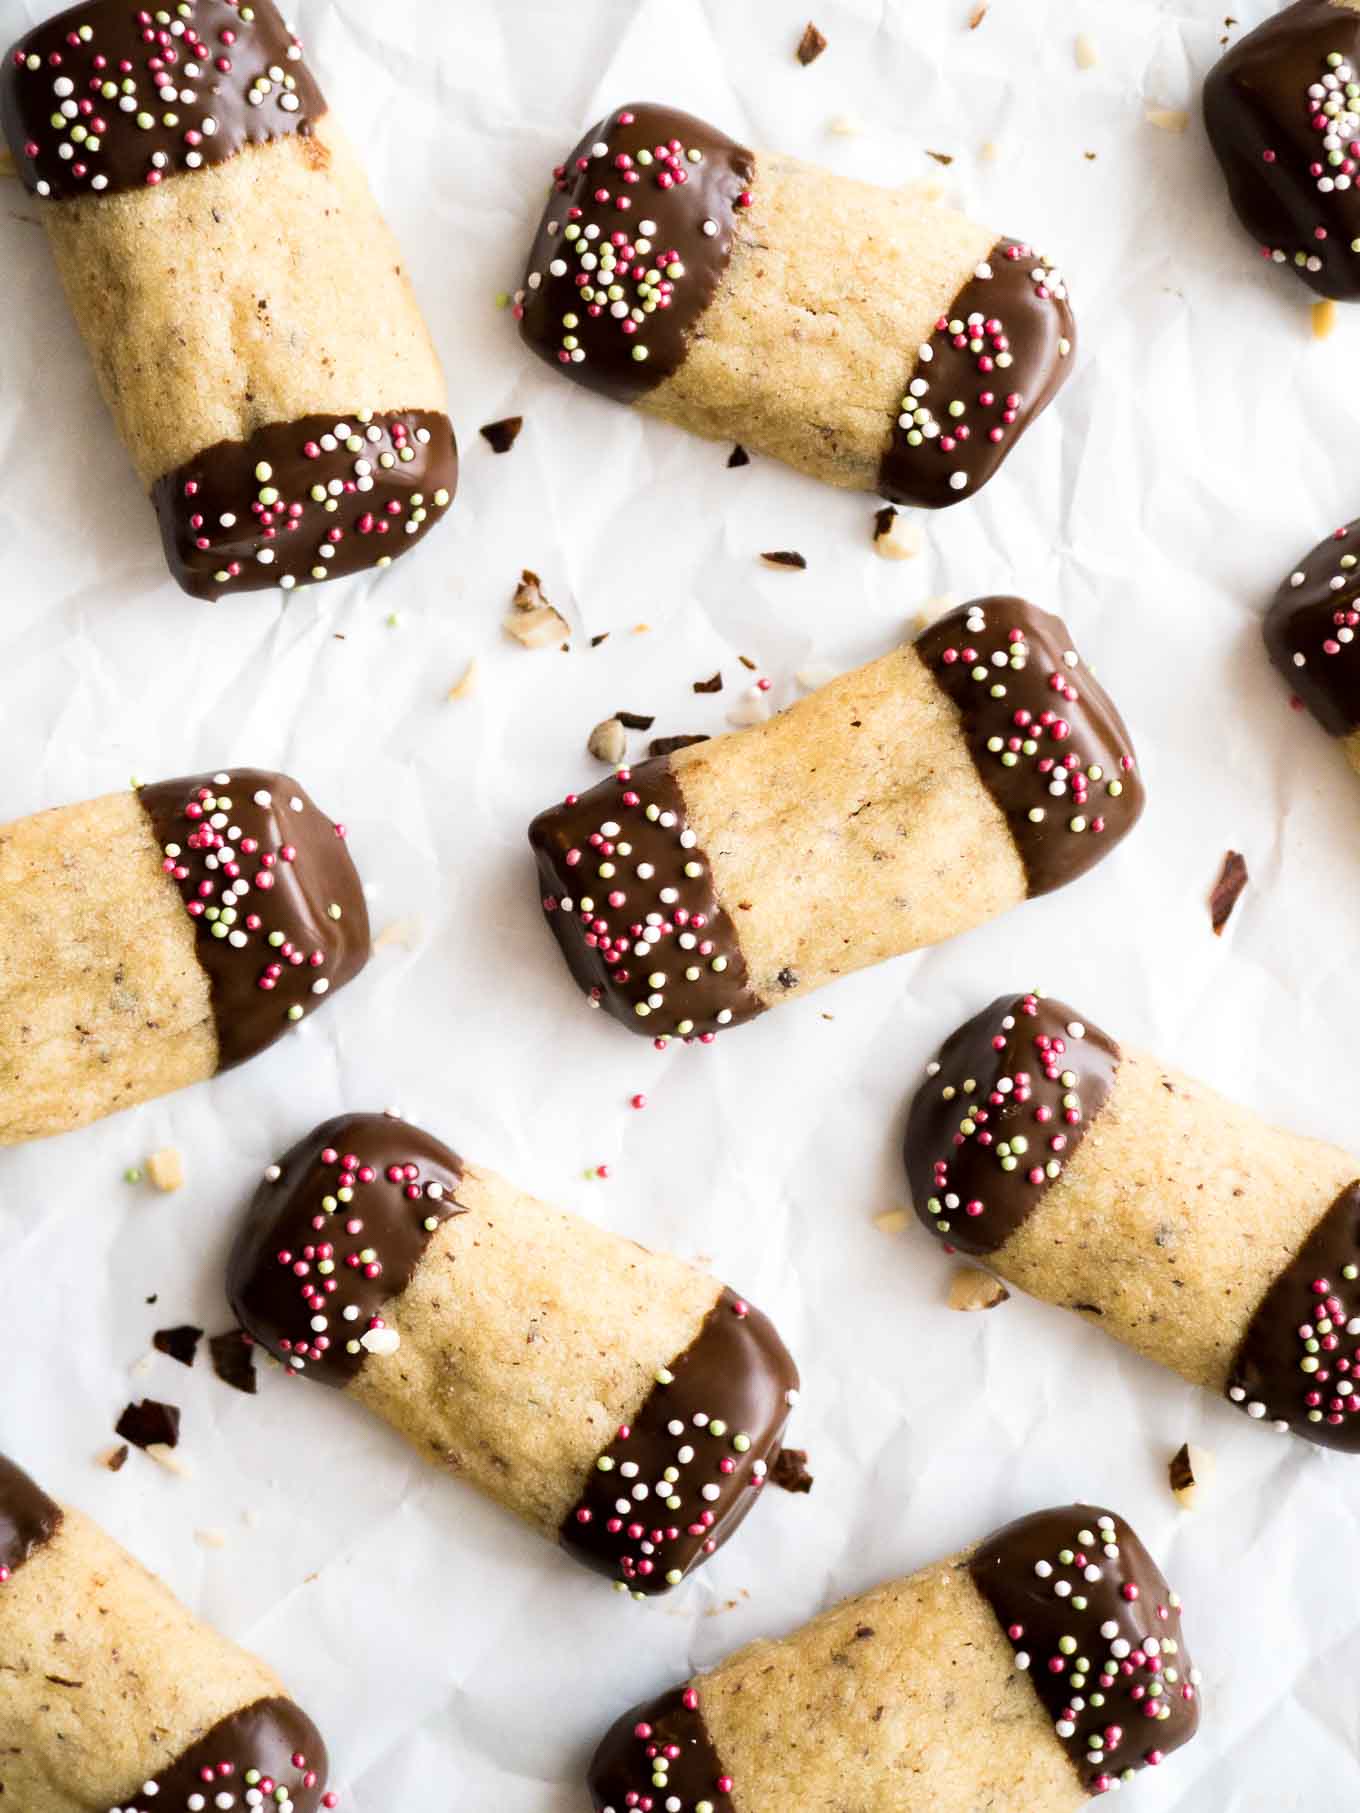 Cookies shaped liked logs with the ends dipped in chocolate on parchment paper.